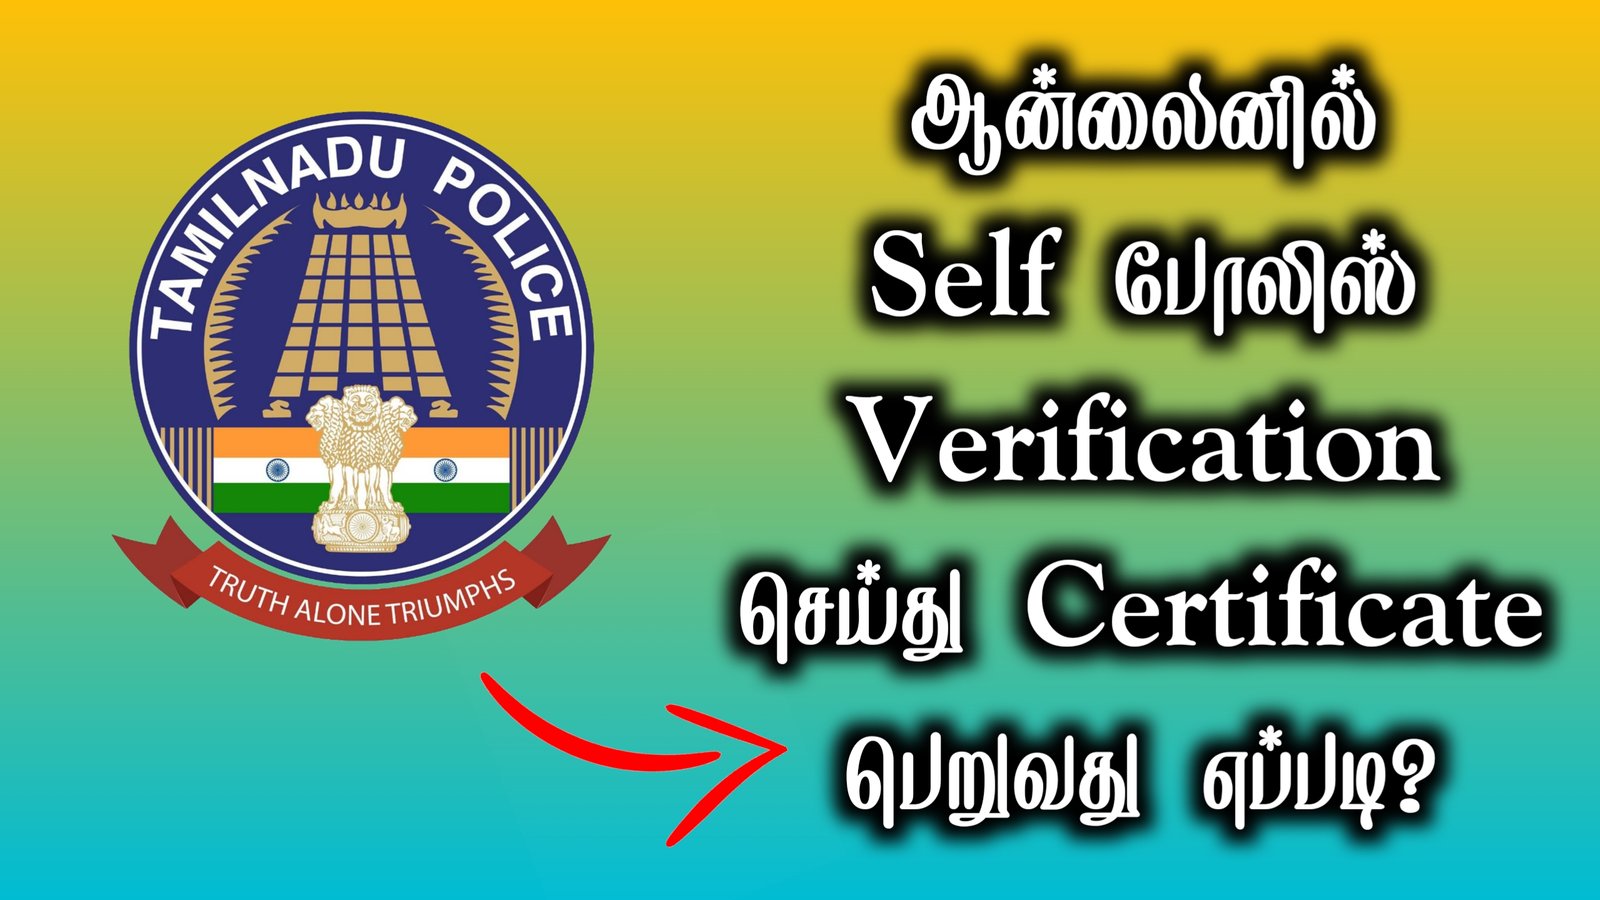 How To Apply Self Police Verification In Online | Get Police Verification Certificate | Tamil